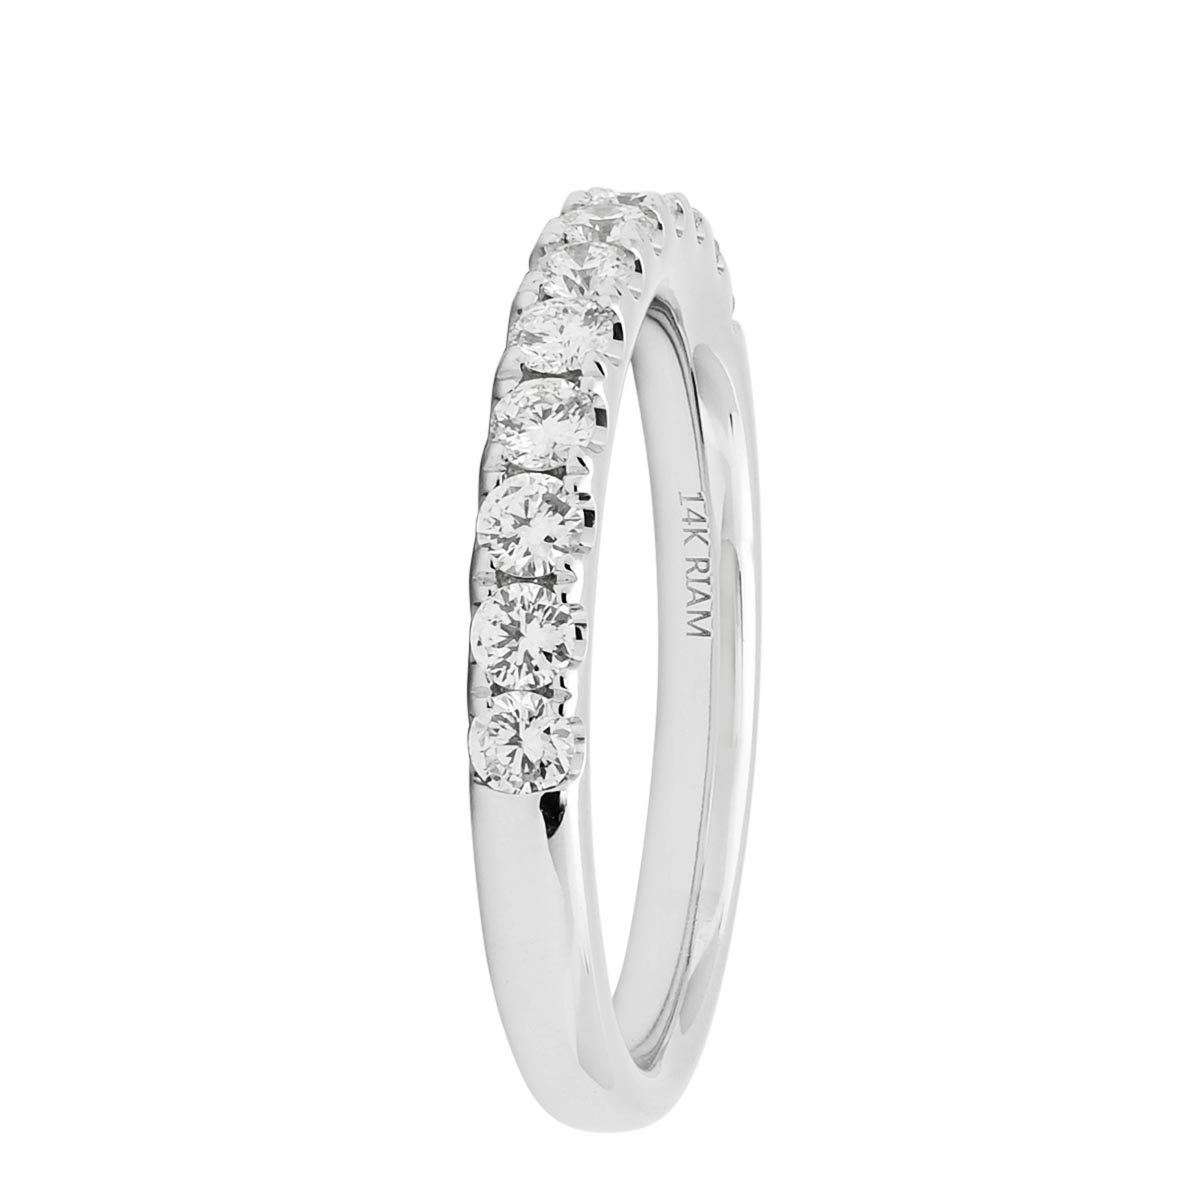 Northern Star Diamond Band in 14kt White Gold (1/2ct tw)